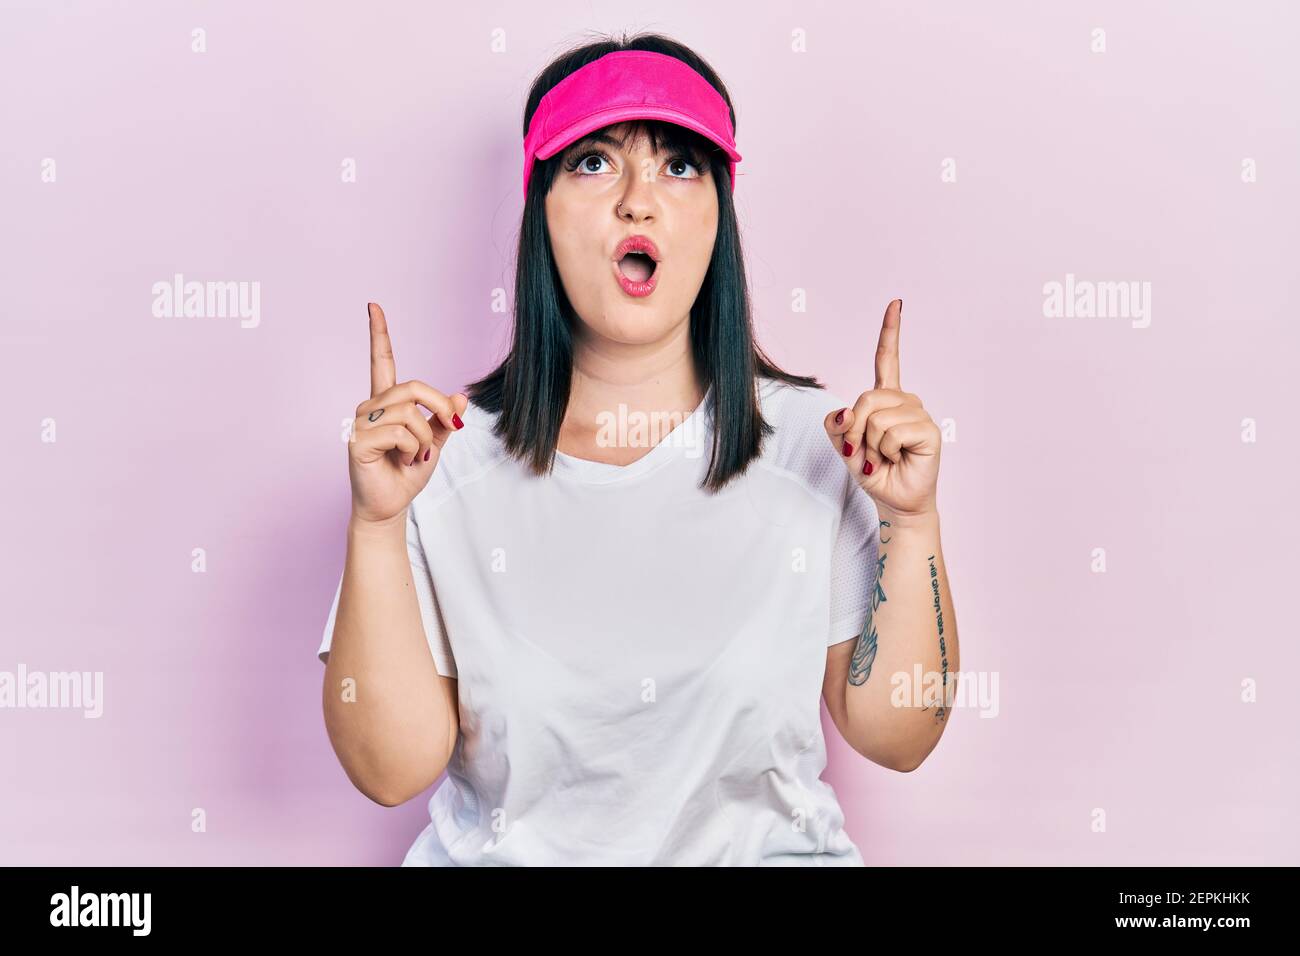 Young hispanic woman wearing sportswear and sun visor cap amazed and surprised looking up and pointing with fingers and raised arms. Stock Photo